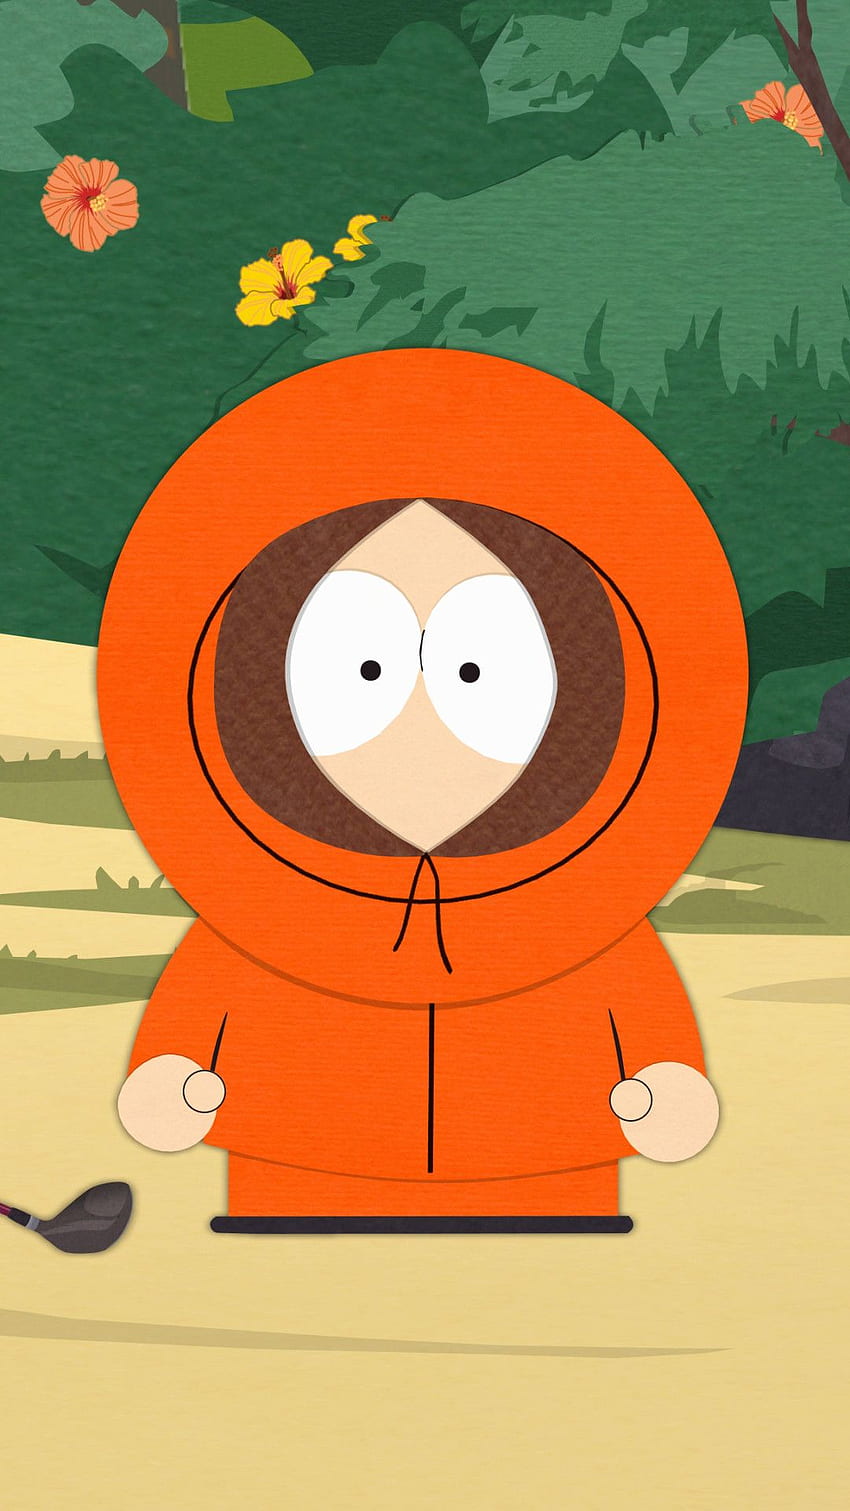 South park kenny dancing gif